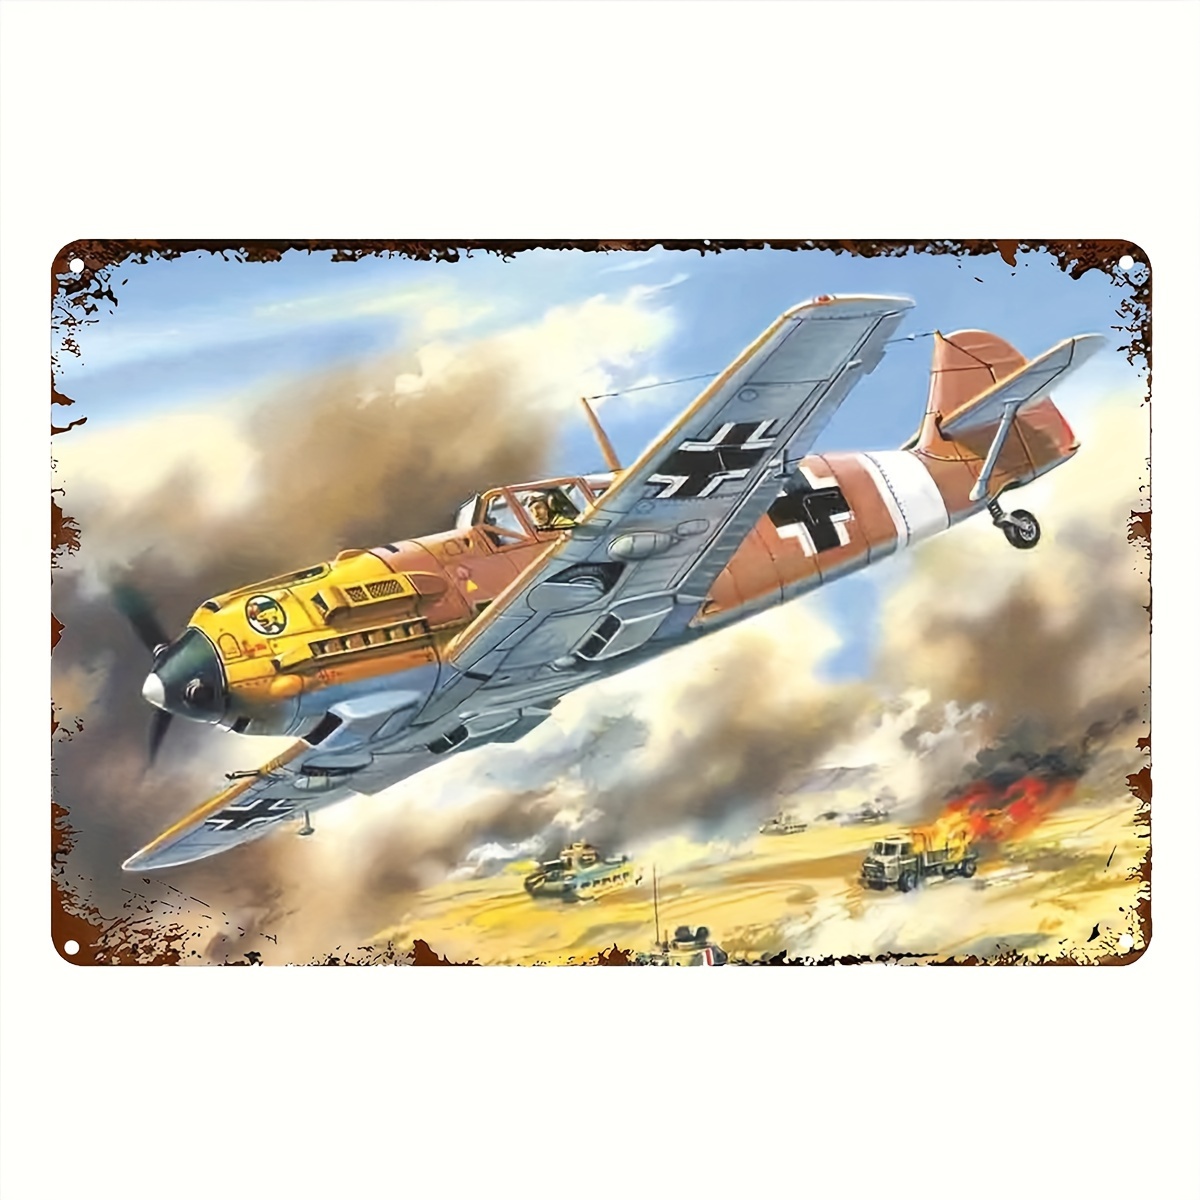 

Vintage Wwii Fighter Plane Metal Tin Sign - Retro Wall Art For Home, Bar, For Man Cave Decor - Durable Iron Construction, 12x8 Inch